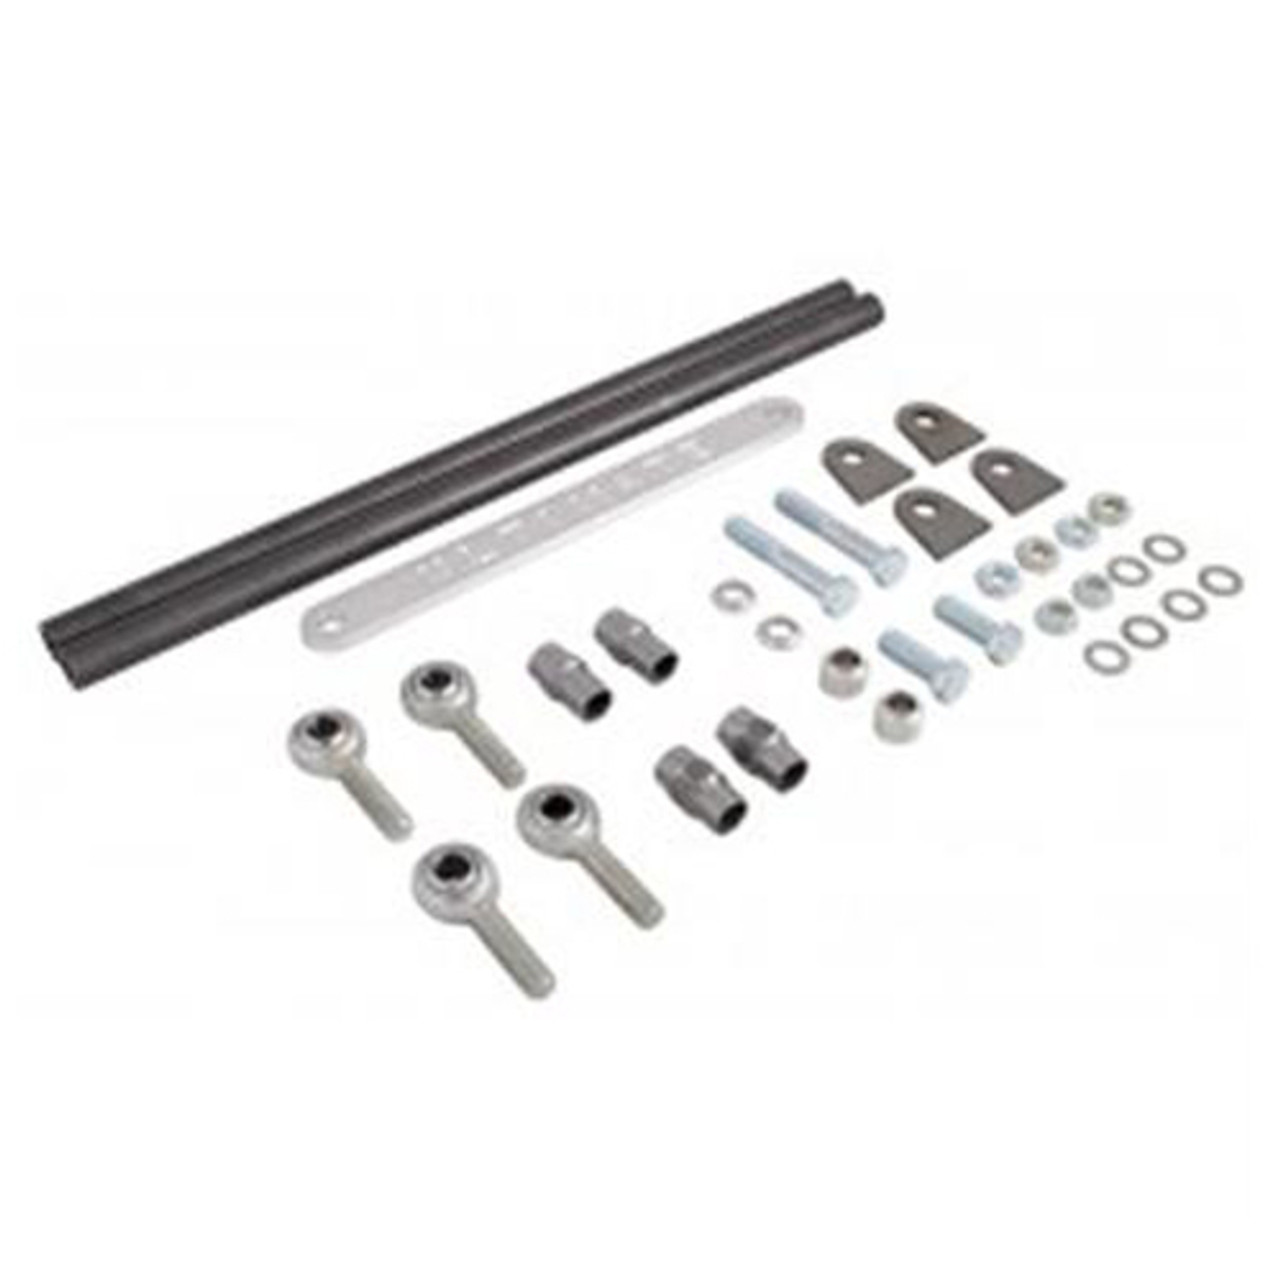 Axle Tube Brace Kit for LPW HD Support Covers